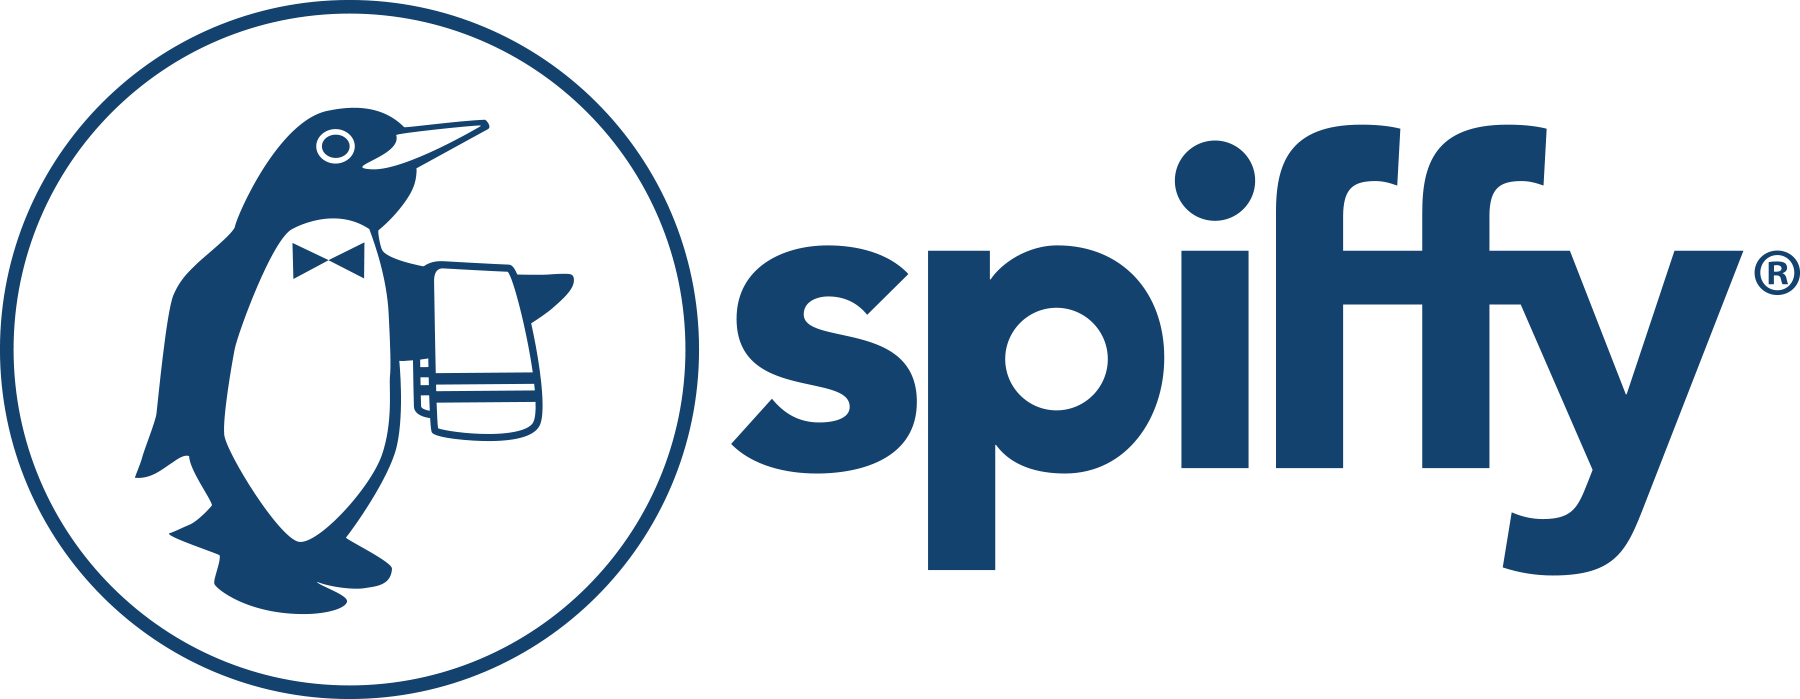 Get Spiffy, Inc., Thursday, January 23, 2020, Press release picture